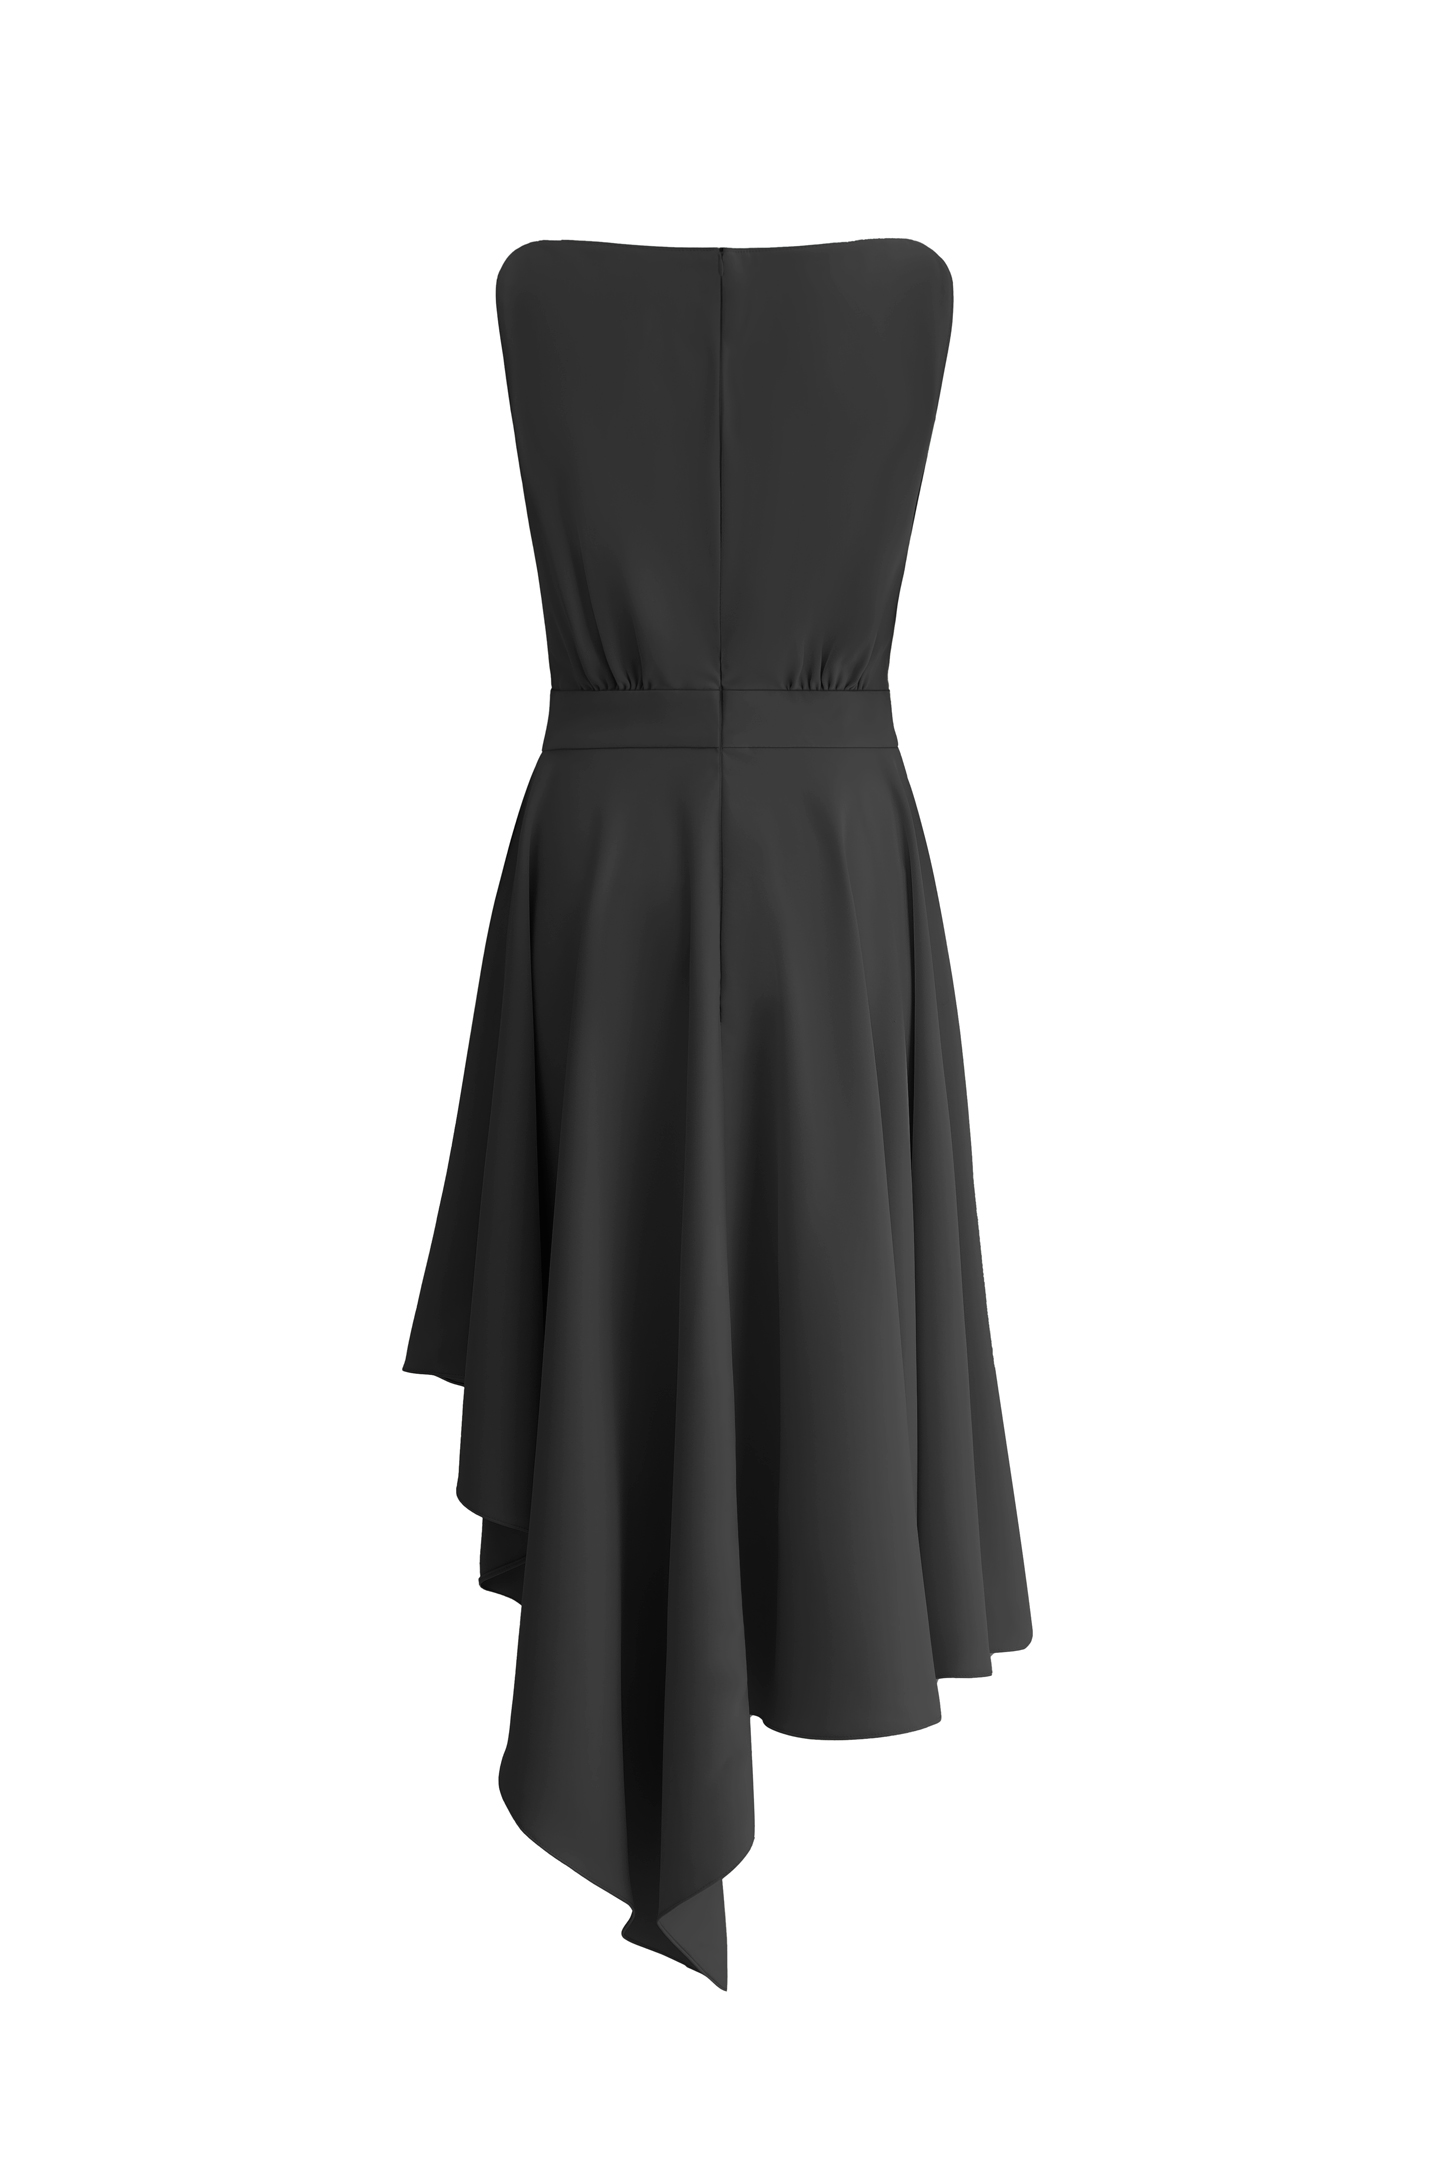 The Morgan Dress in Black - Atelier Patty Ang